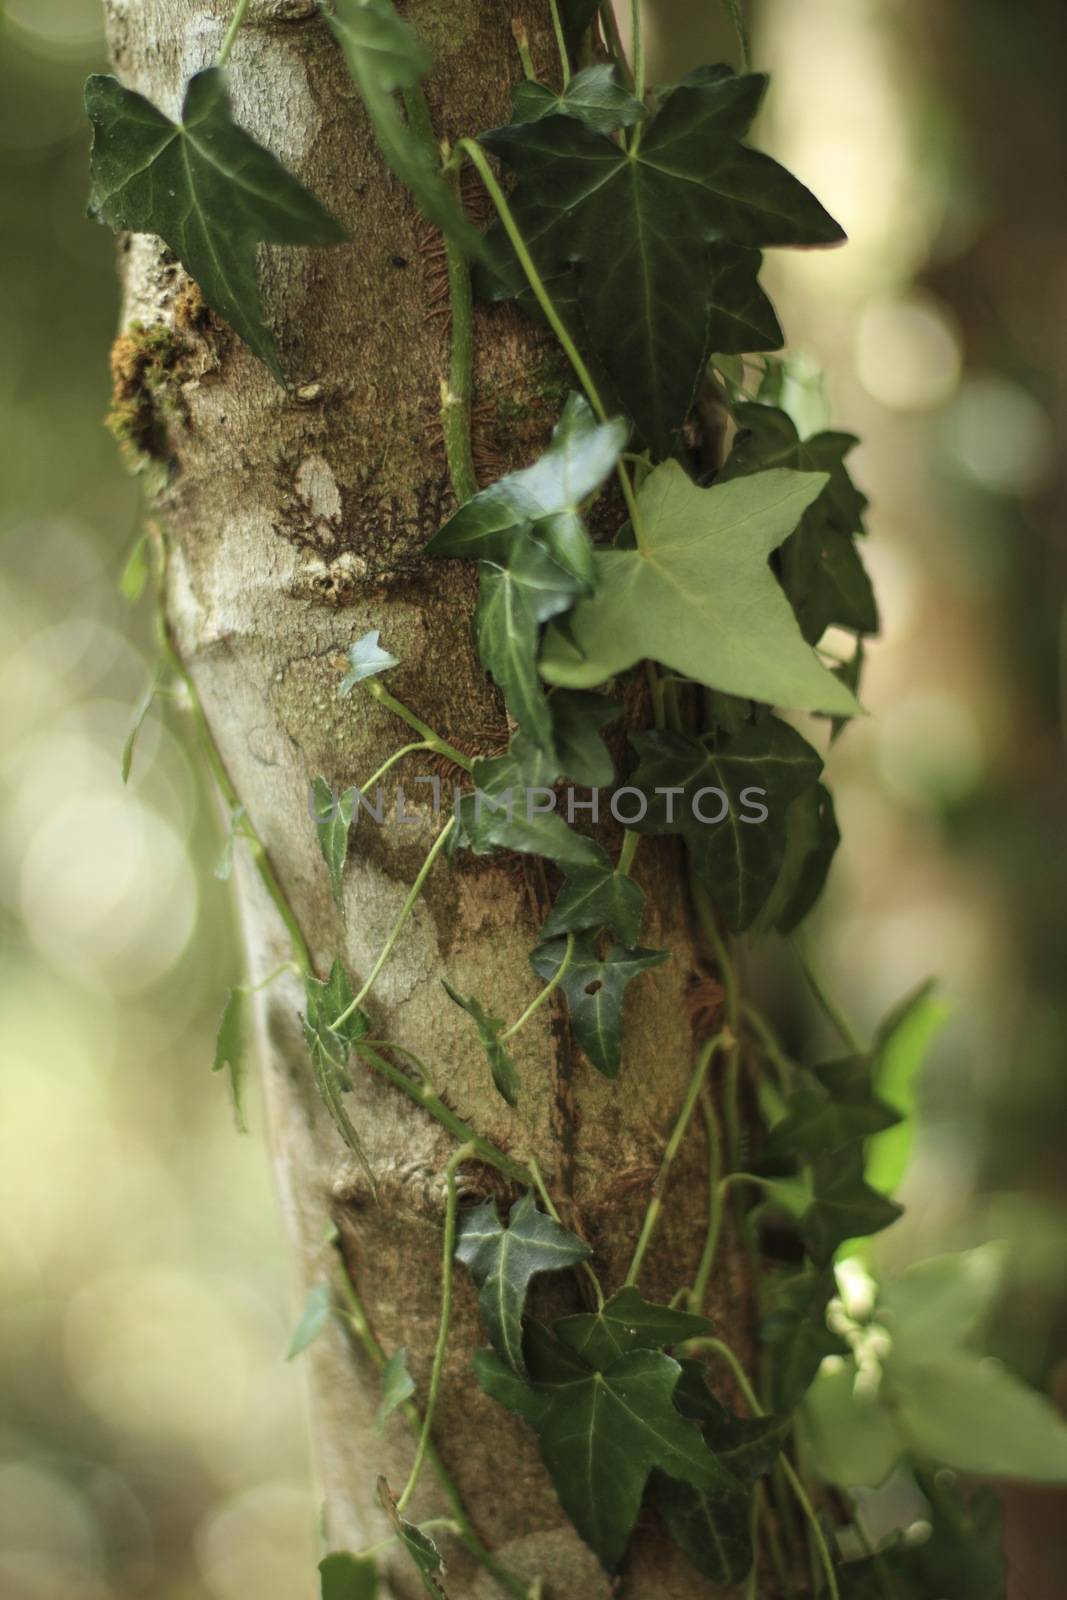 Ivy wrappy around a young tree close up